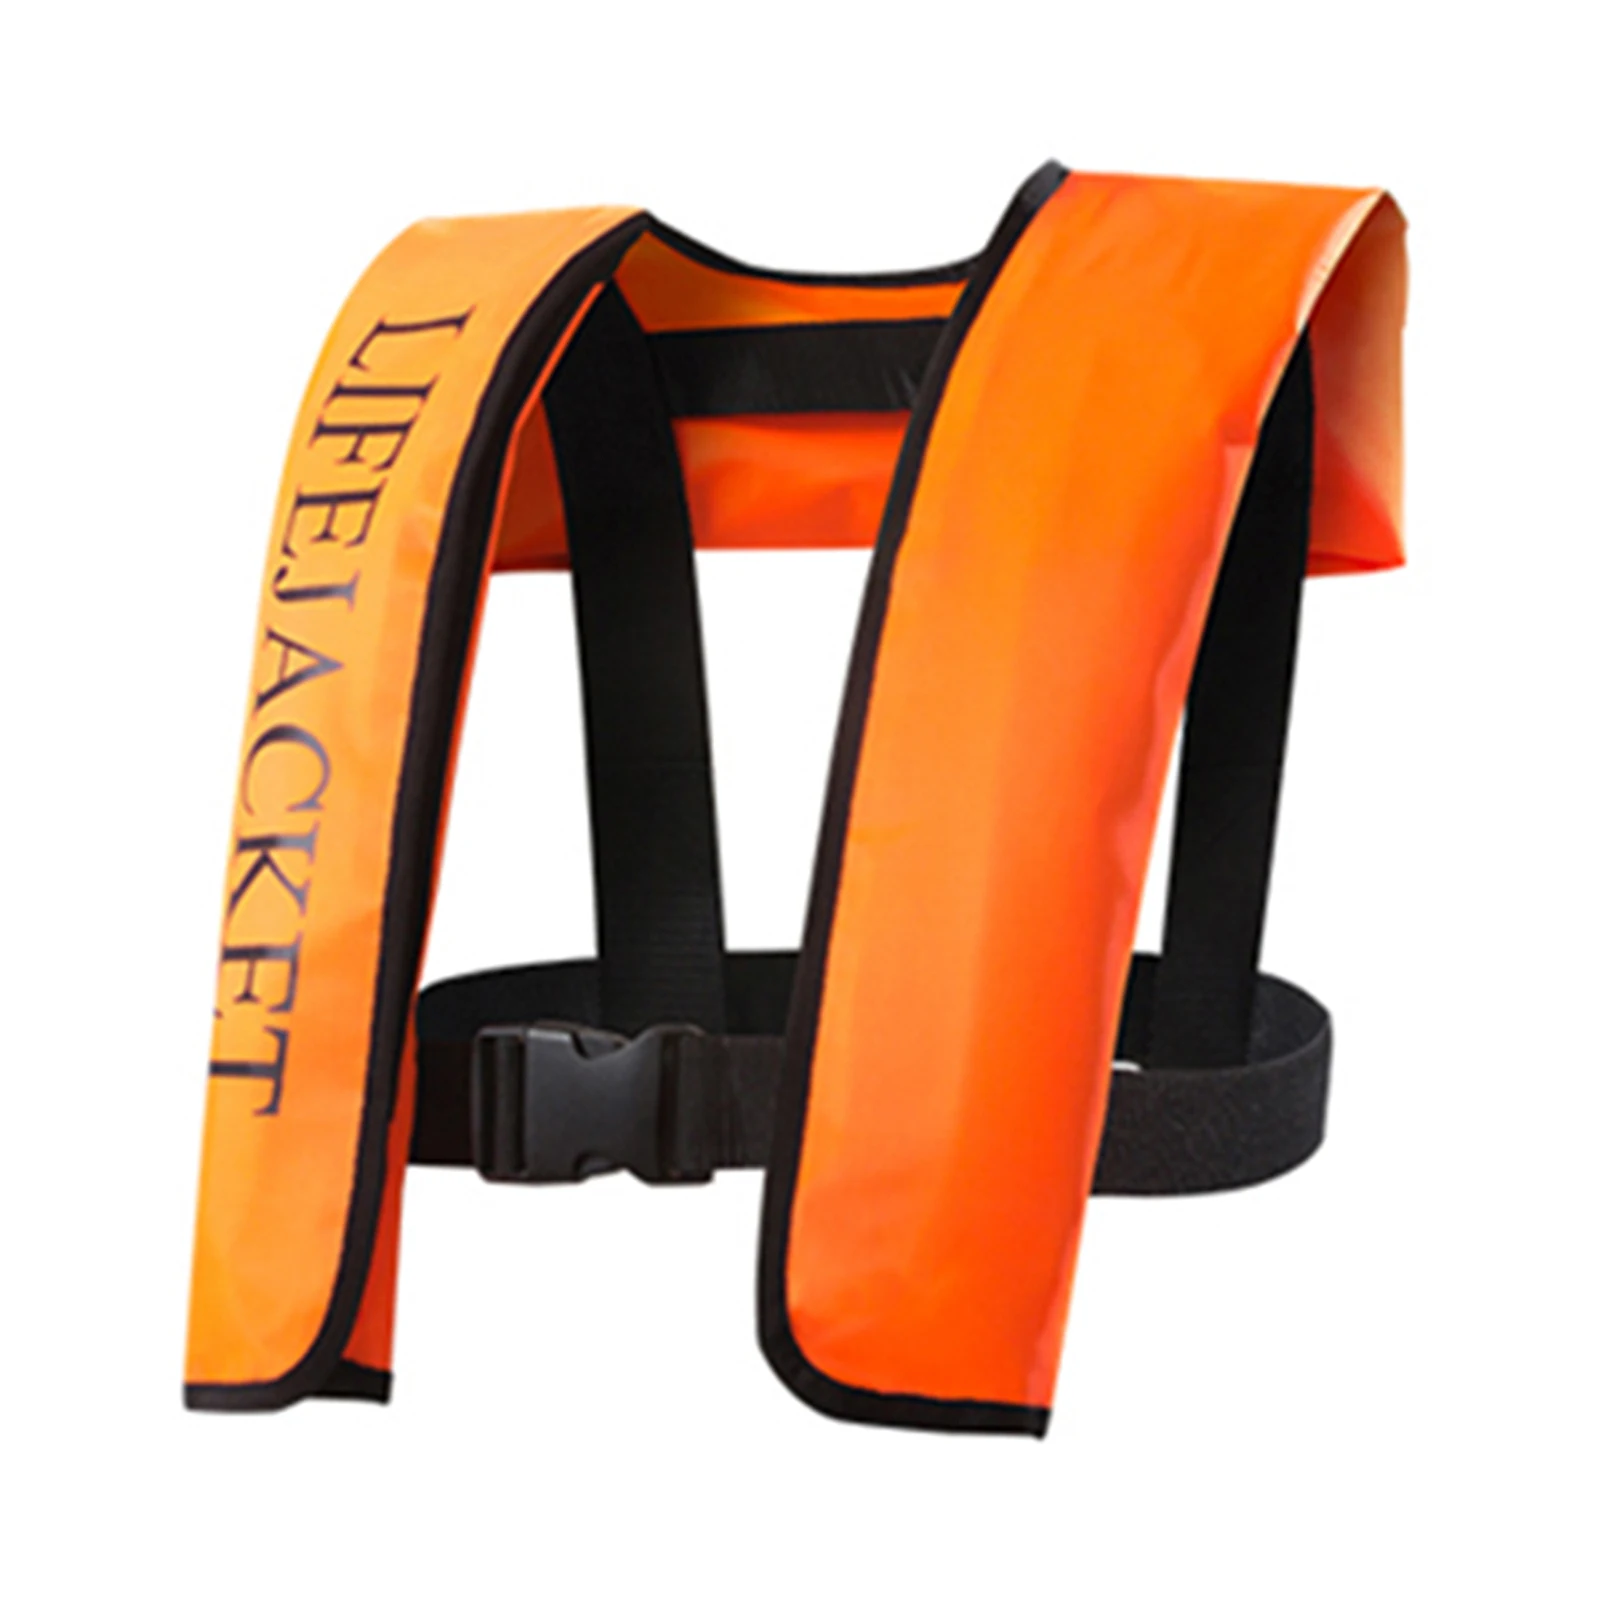 Rescue Life Vest Safety Float Suit For Water Sports Kayak Fishing Surfing Swimming Survival